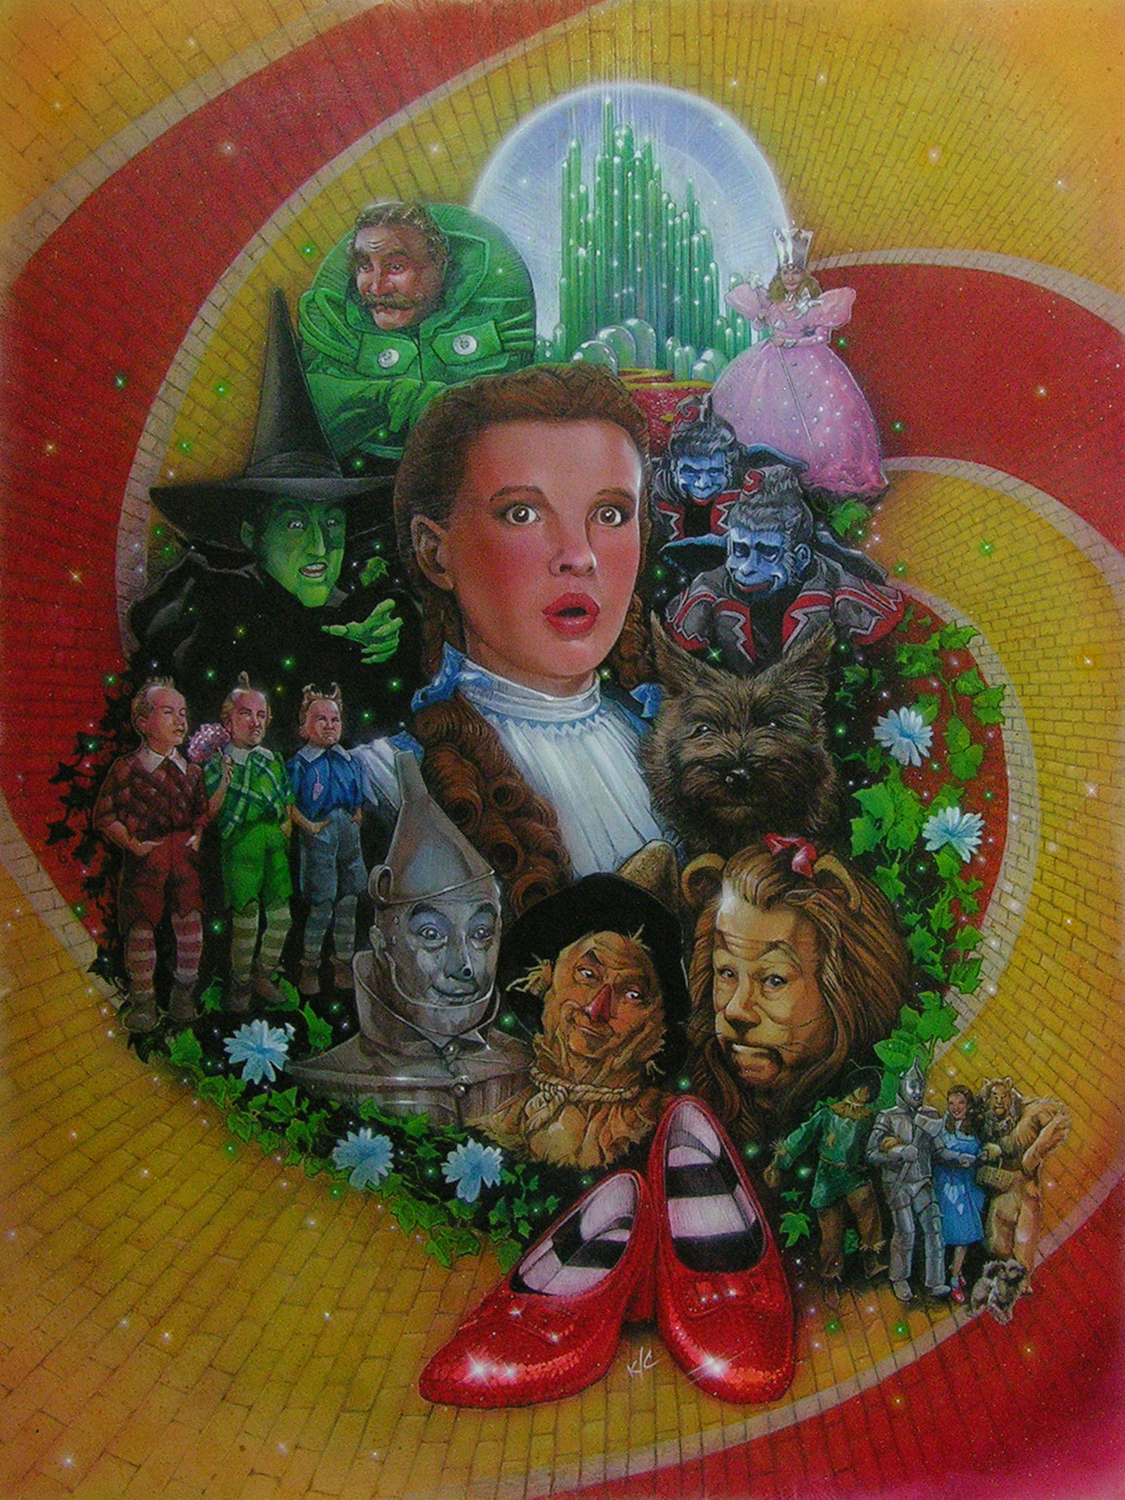 The Bad Flip Blog: The Wizard of Oz - Final